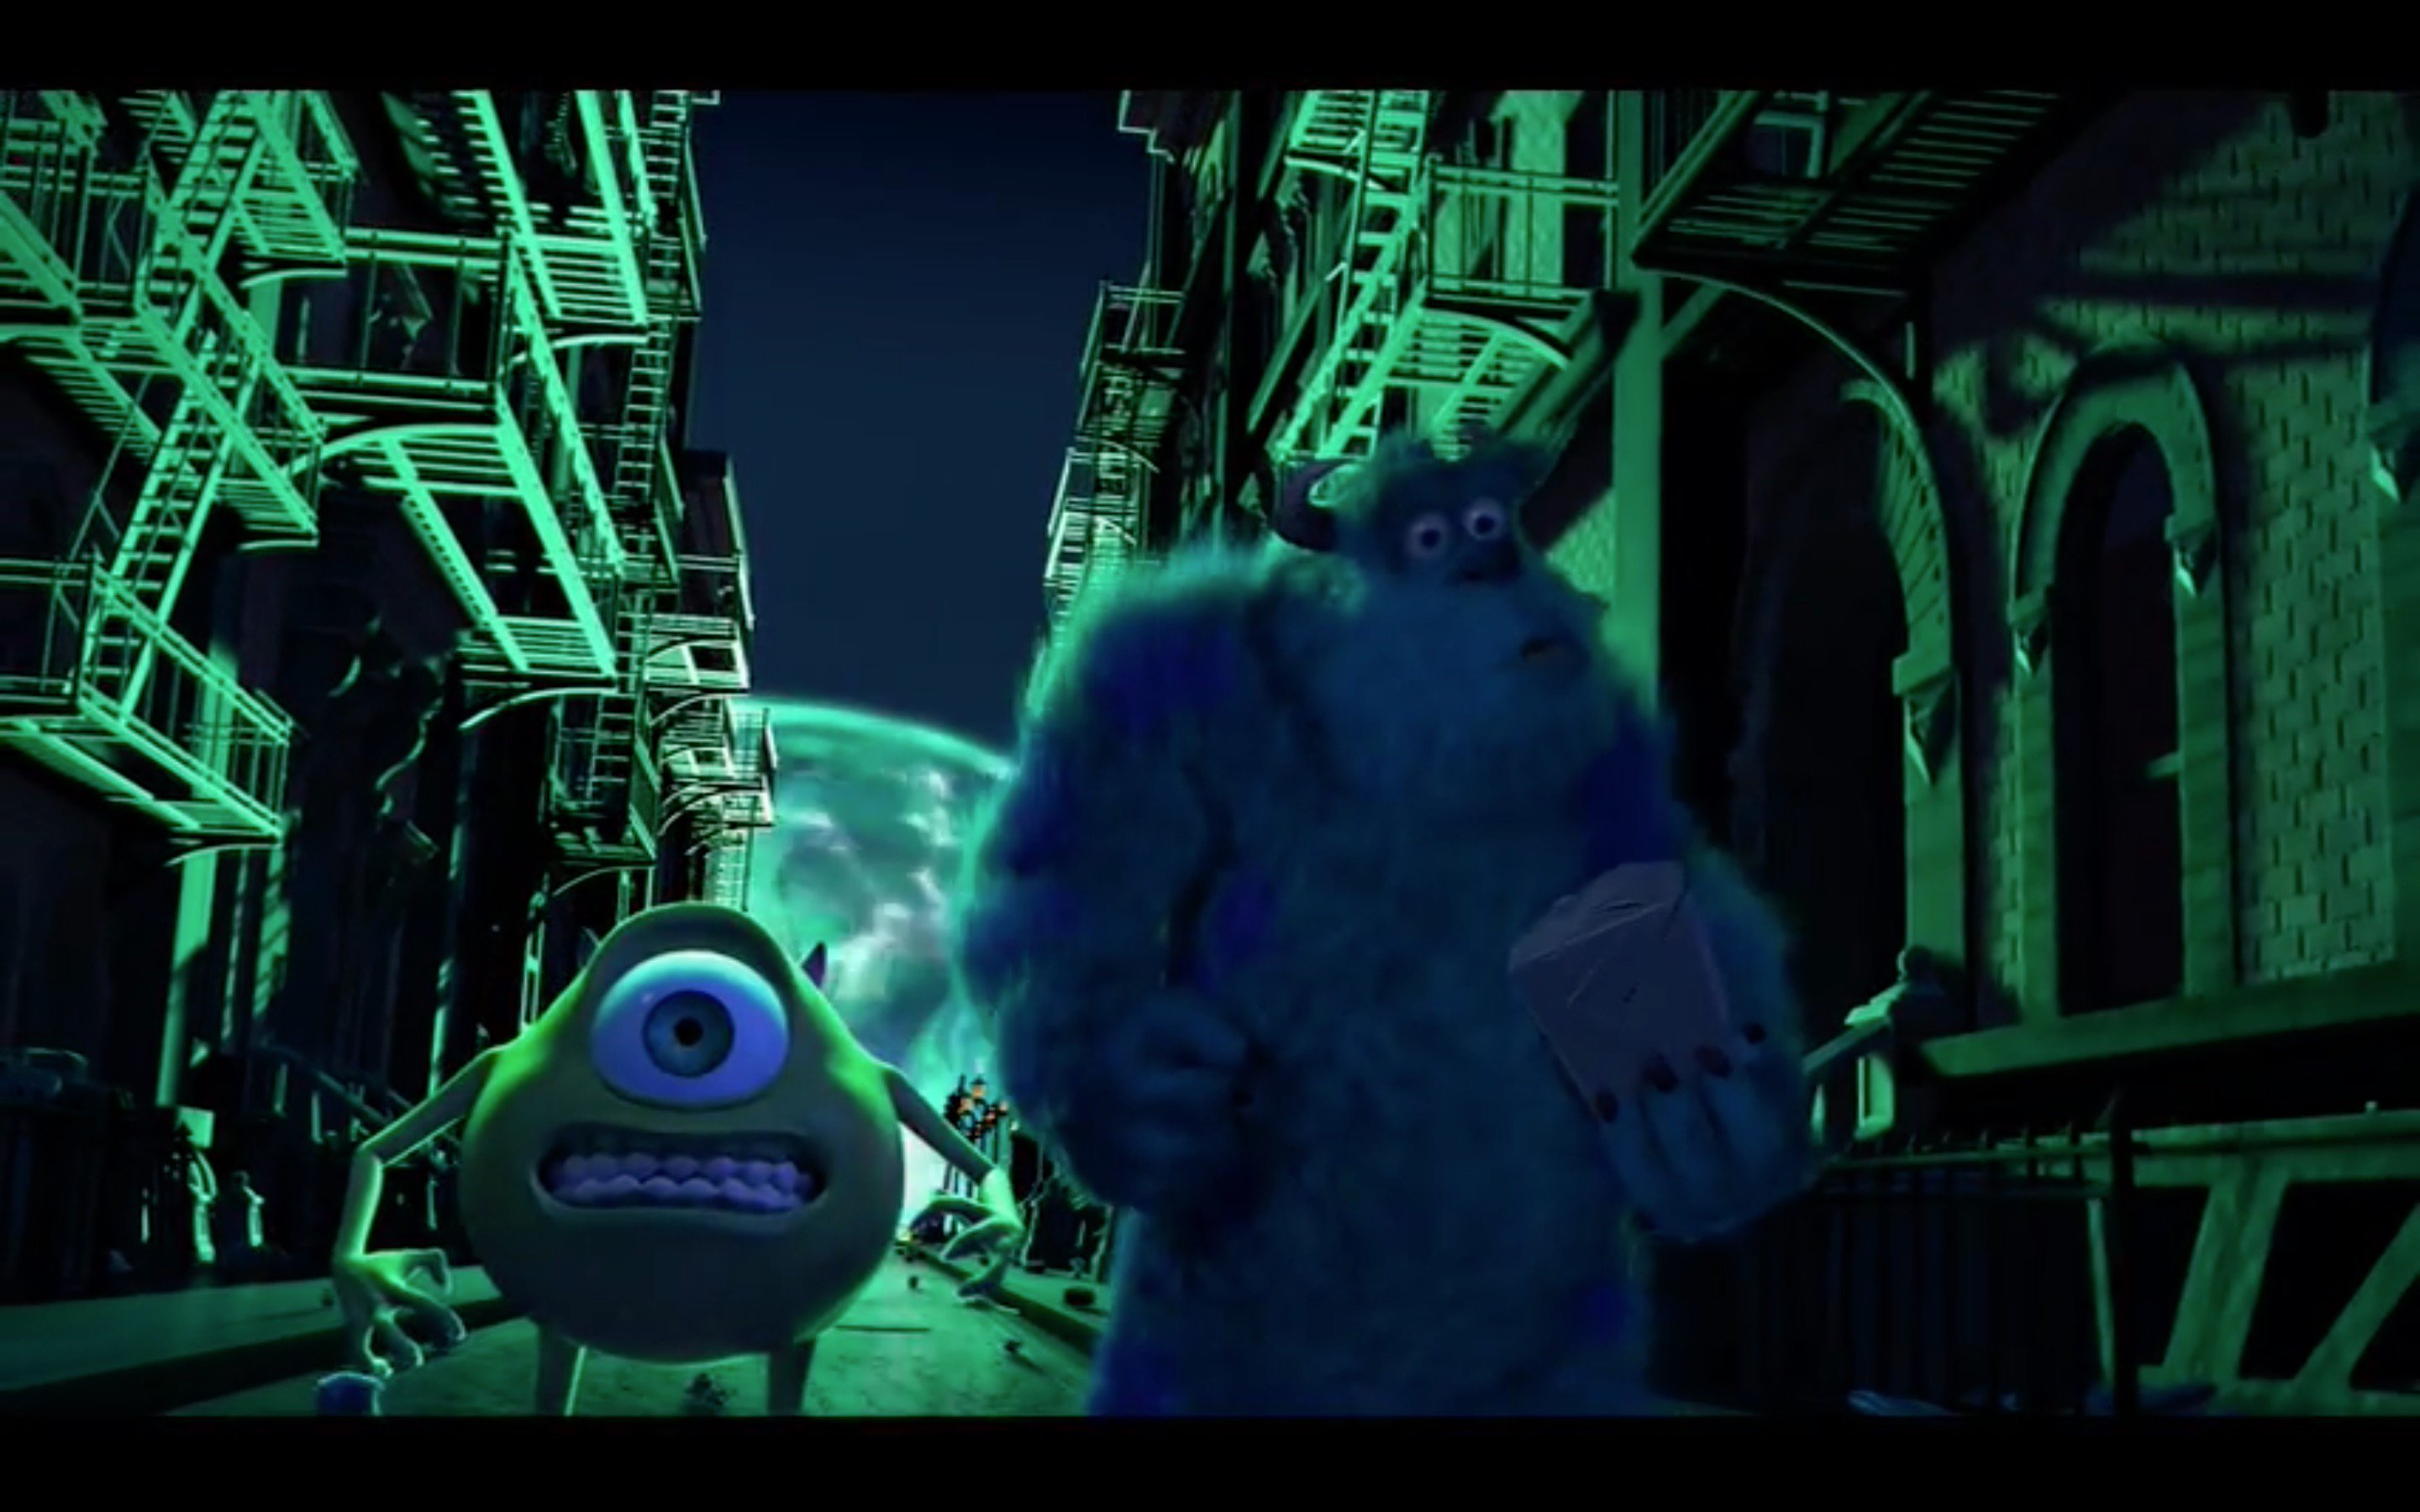 Monsters Inc Scene Cut After 9/11 Tragedy Sheds Light On Impact Of Historical Event